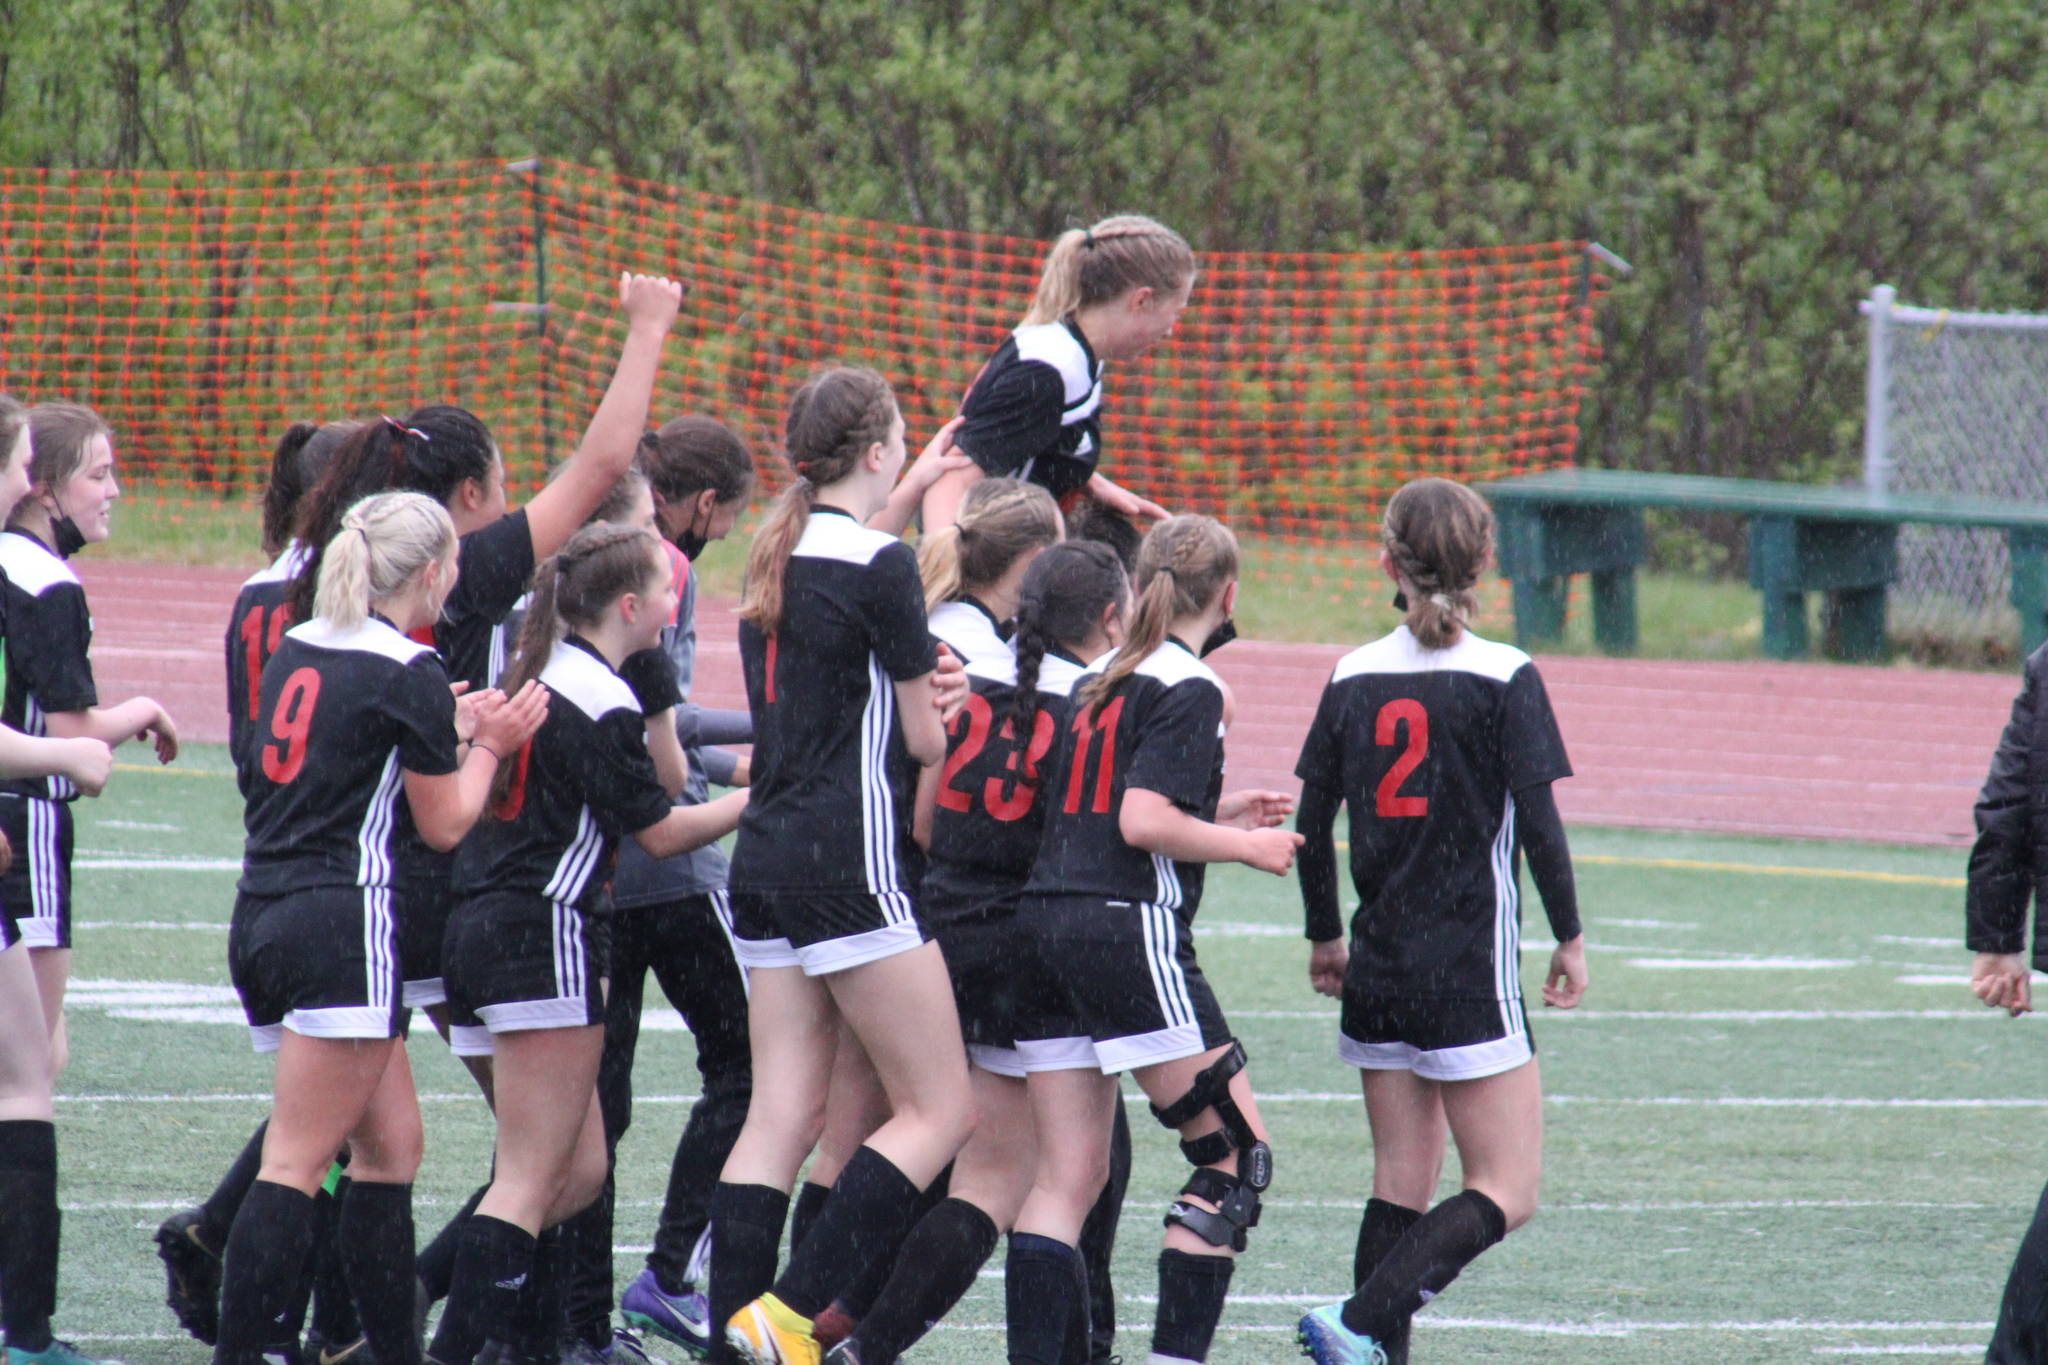 Members of the JDHS girls soccer team celebrate after clinching the state soccer title. The team capped a perfect season by besting the Soldotna Stars 5-1 to clinch the Division II title. (Courtesy Photo/Carolyn Kelley)